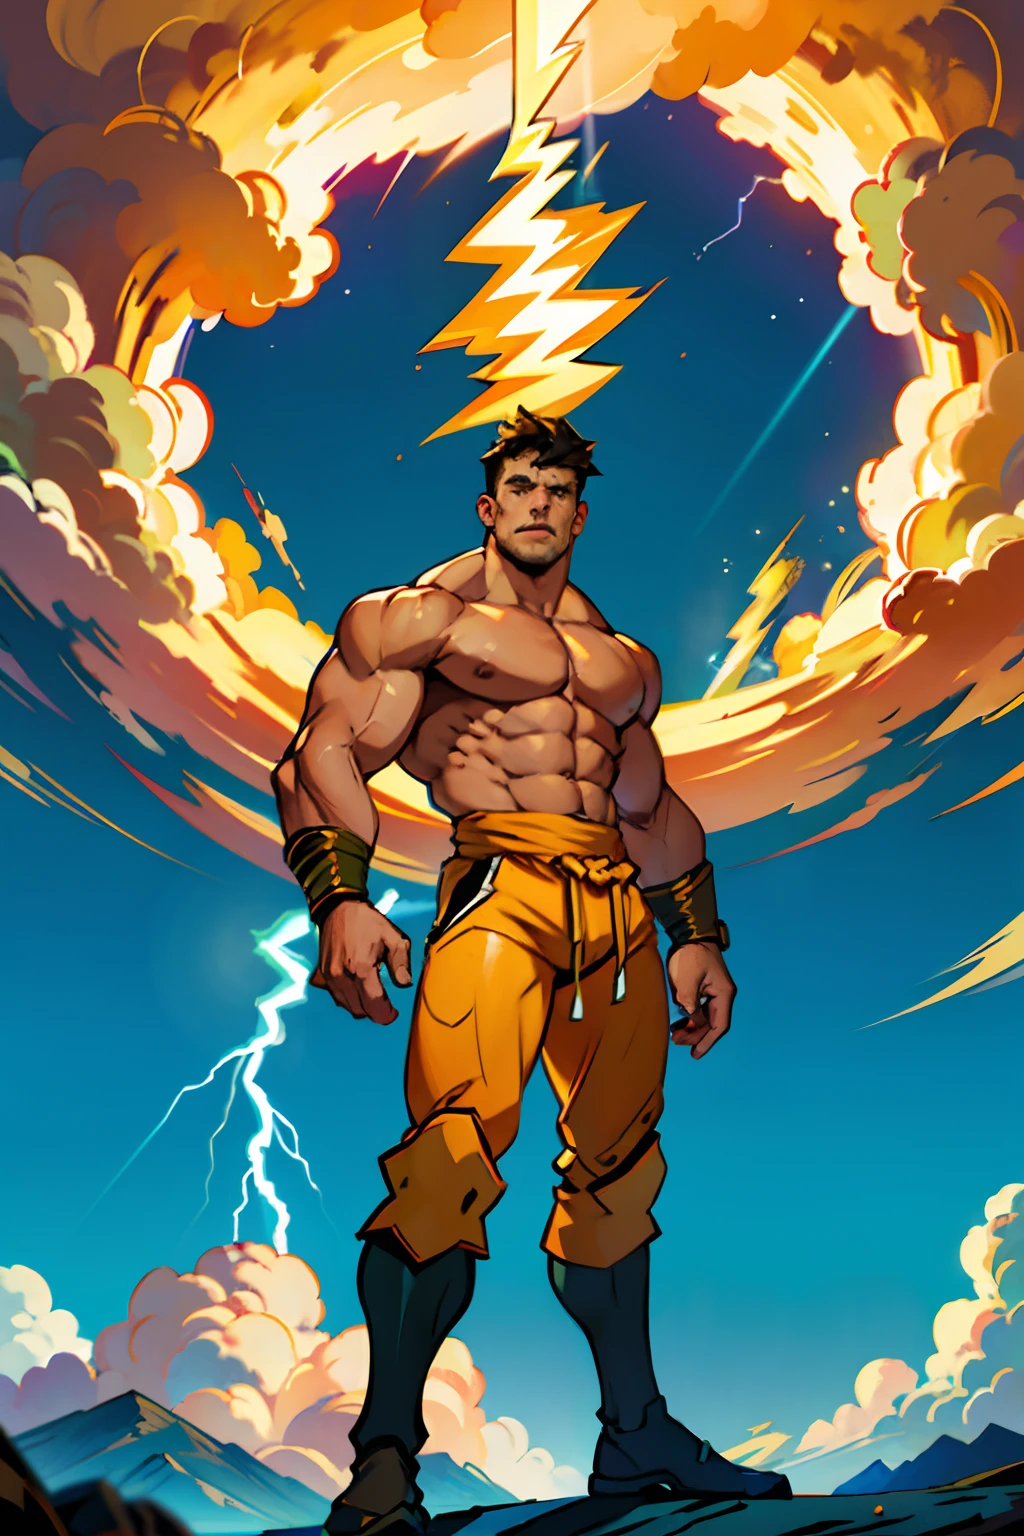 A muscular man standing in a power pose, legs apart, flexing biceps, background is big yellow cloud of explosive of energy with lightning, mood is exciting, vibrant climactic, daytime light, character design.